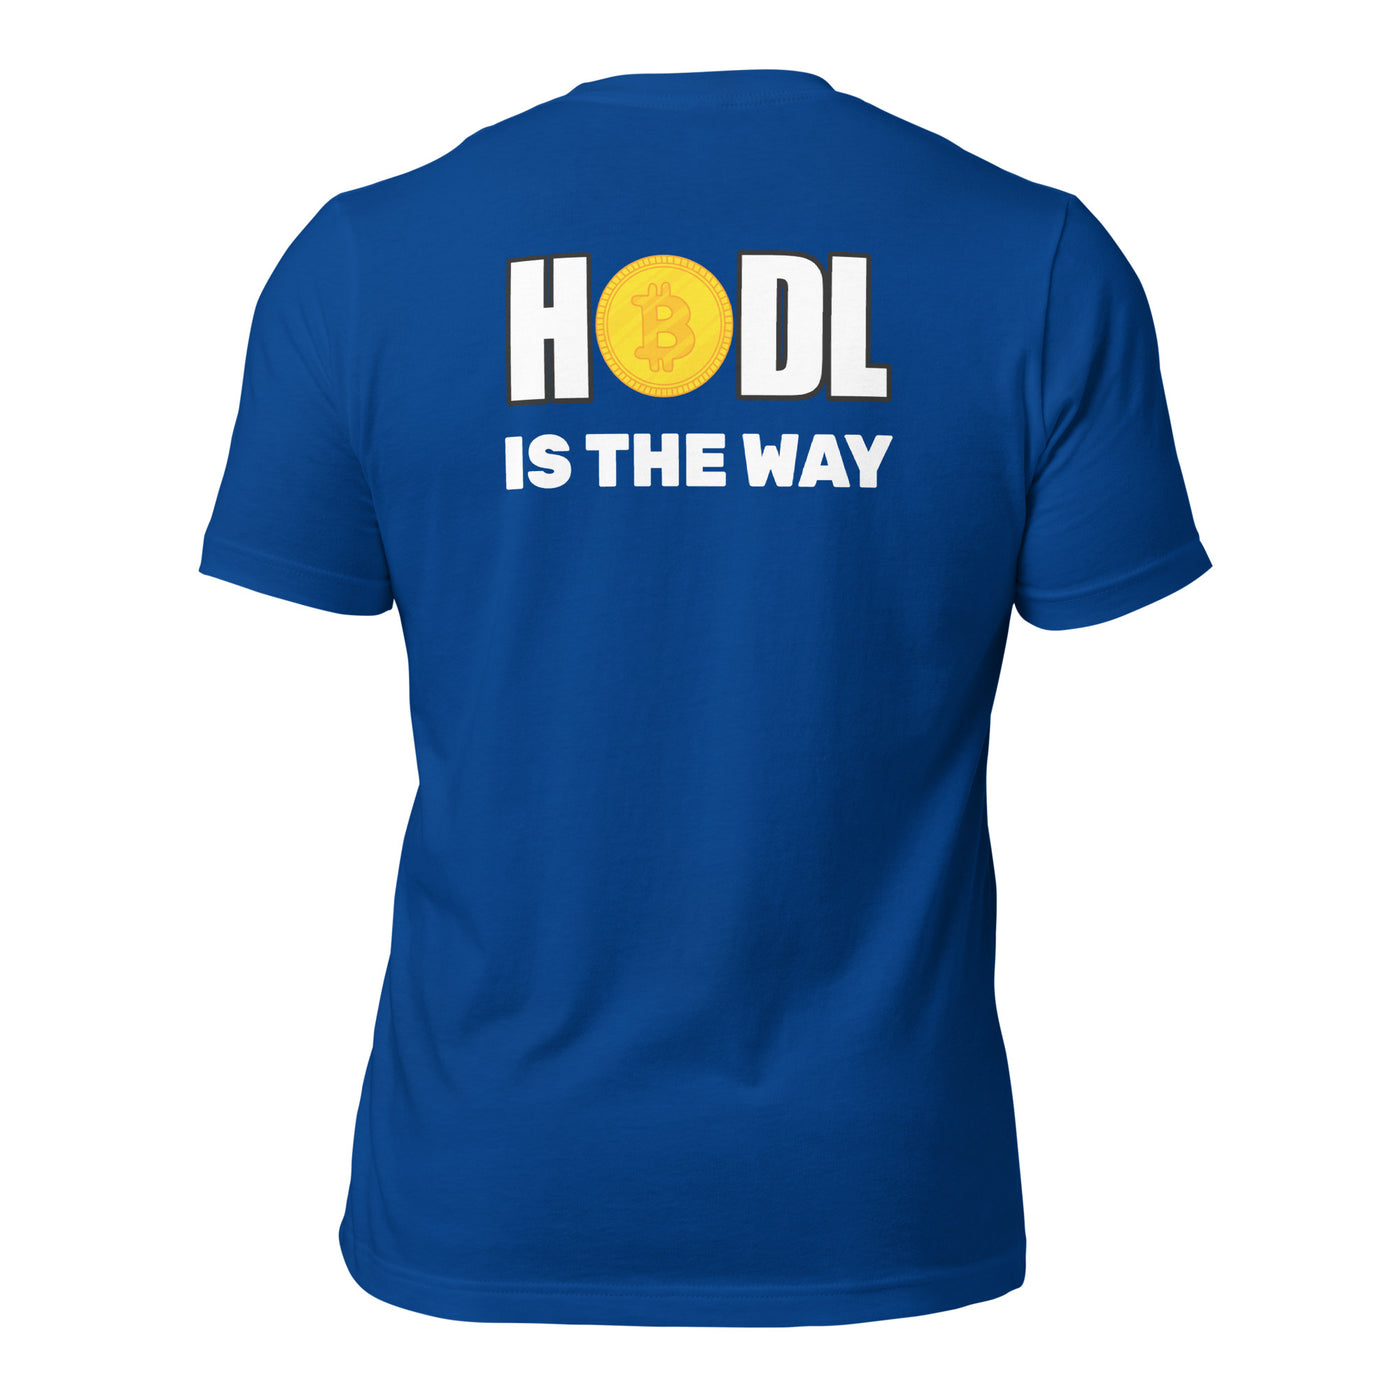 Hodl is the way - Unisex t-shirt (back print)